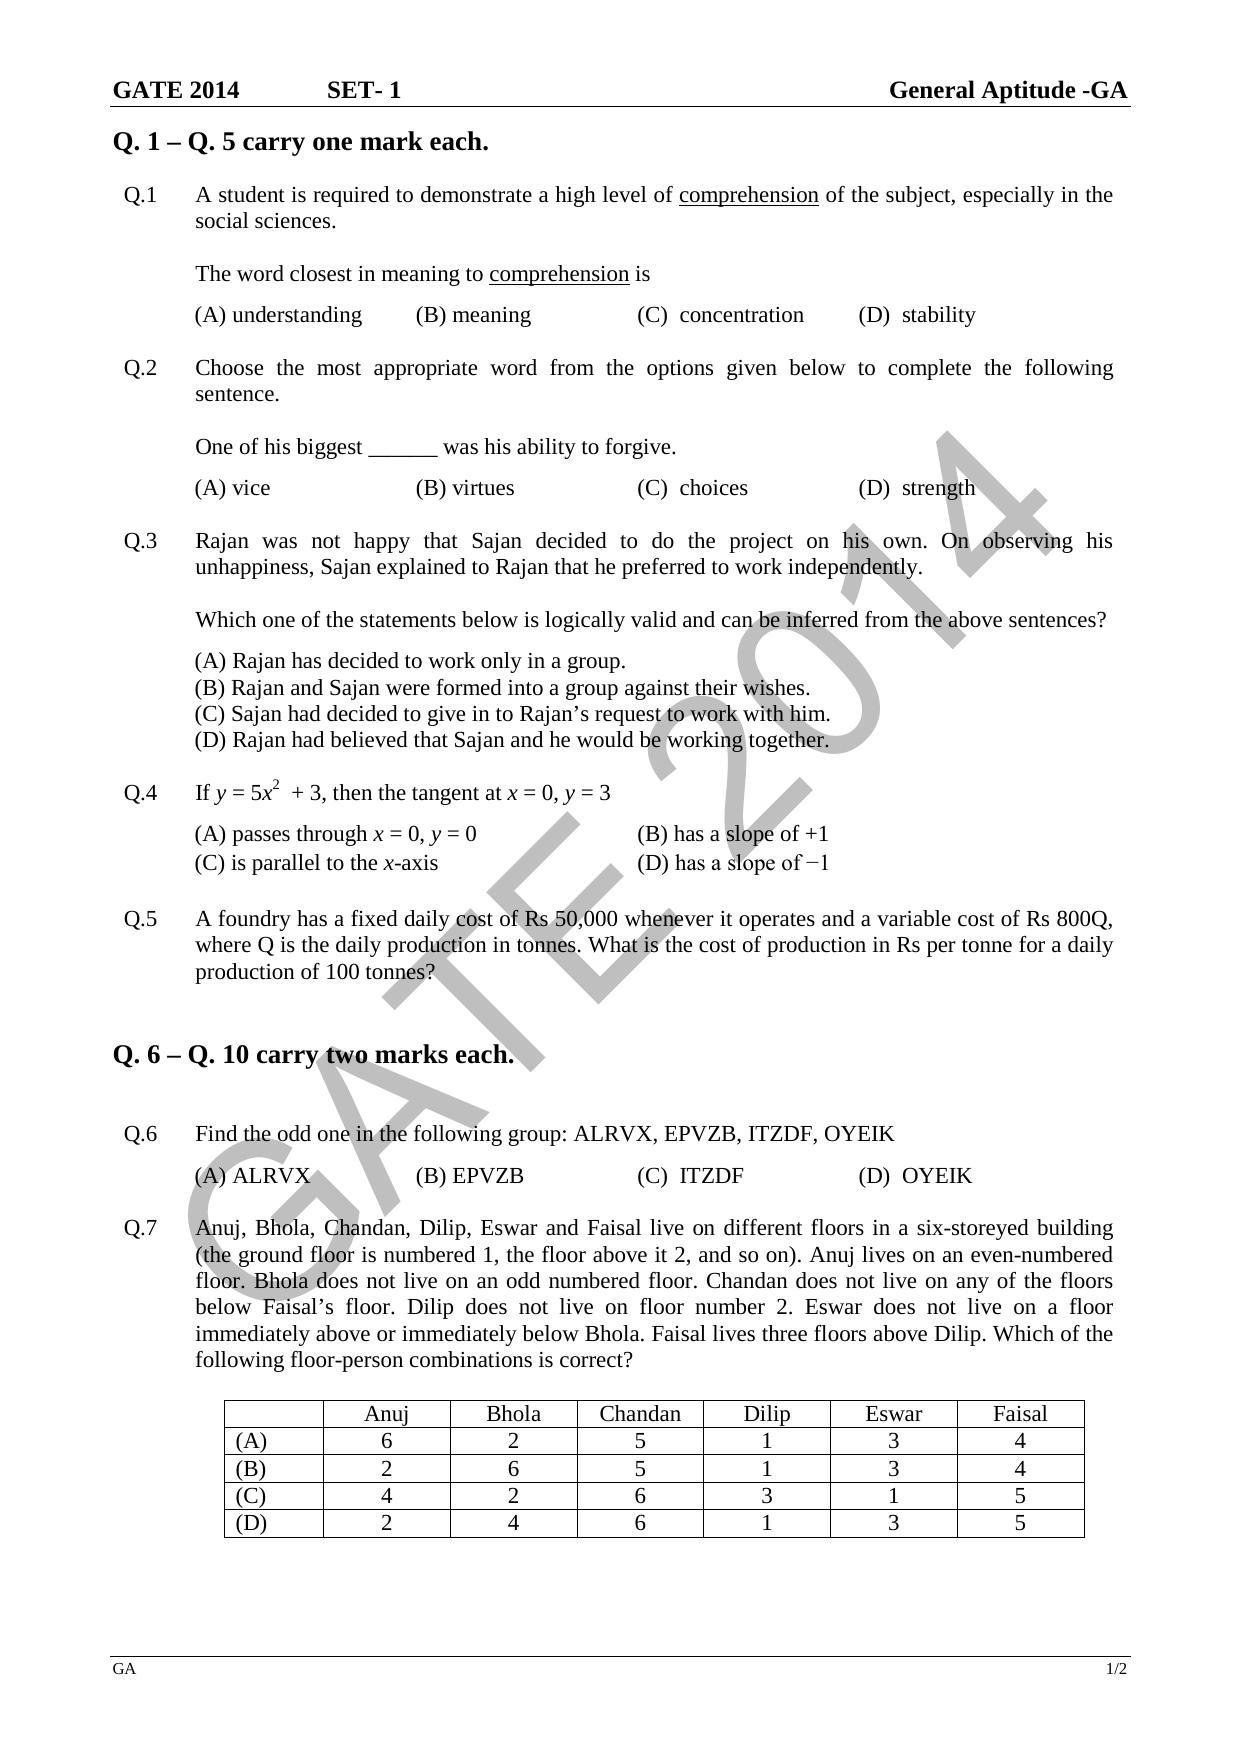 GATE 2014 Physics (PH) Question Paper with Answer Key - Page 5